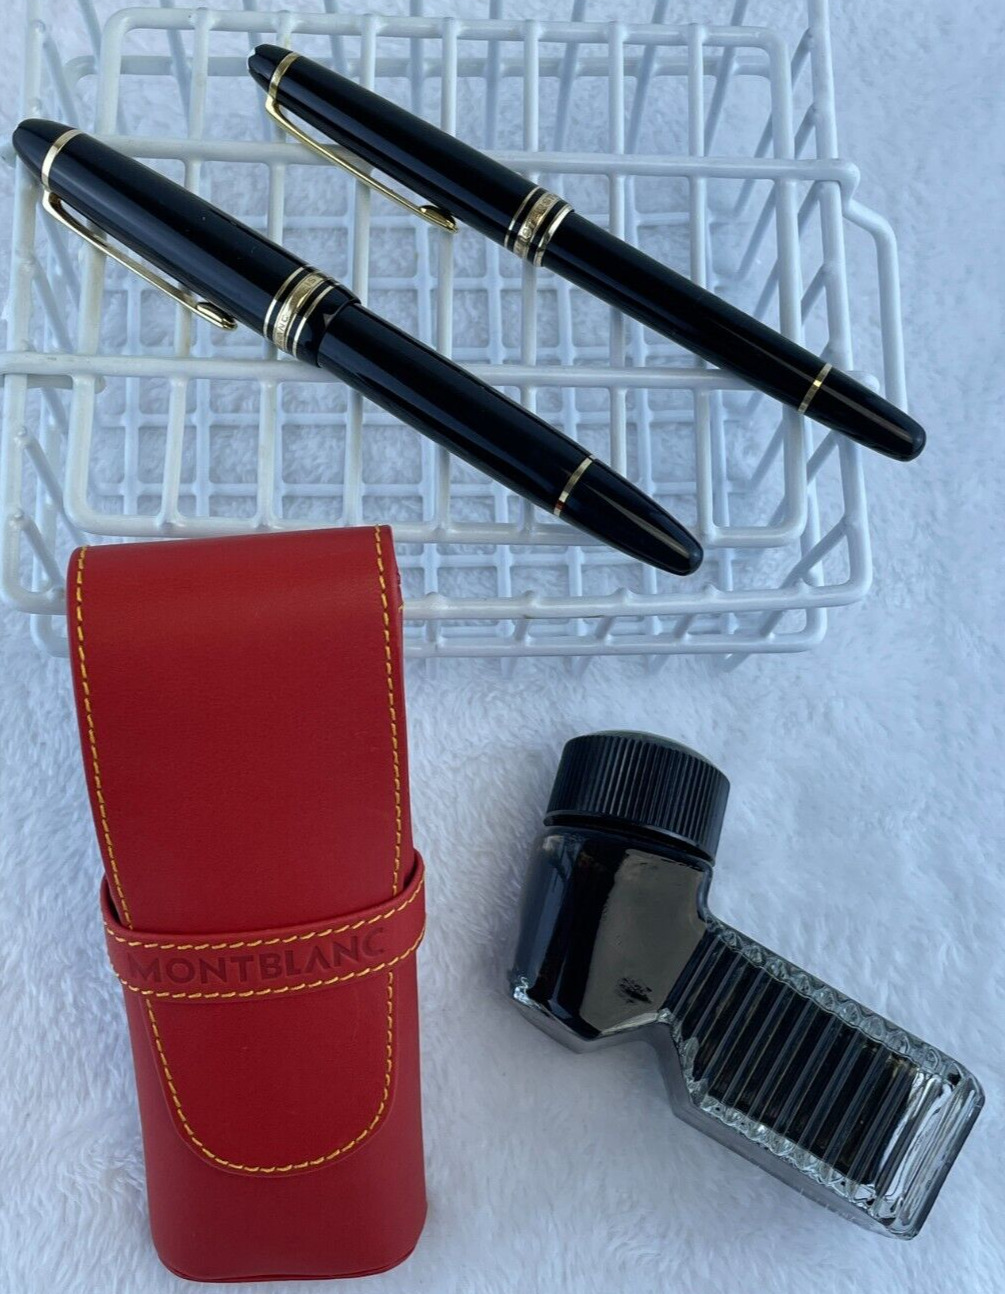 Montblanc Meisterstruck 146/4810 Fountain and Ballpoint Pen Set Red Leather Case